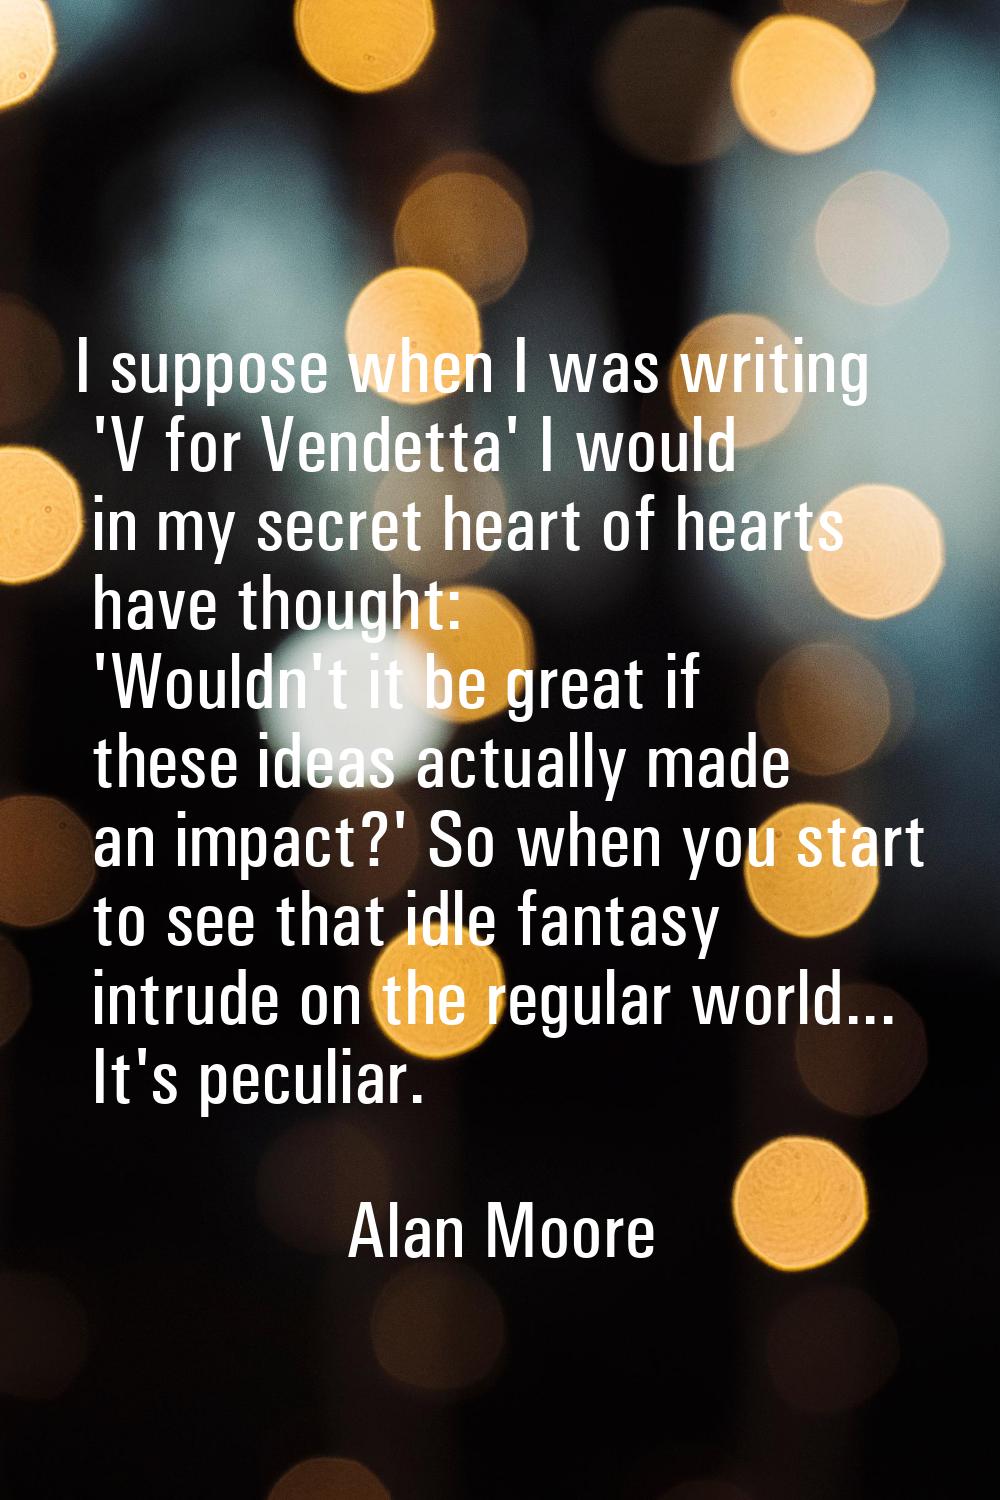 I suppose when I was writing 'V for Vendetta' I would in my secret heart of hearts have thought: 'W